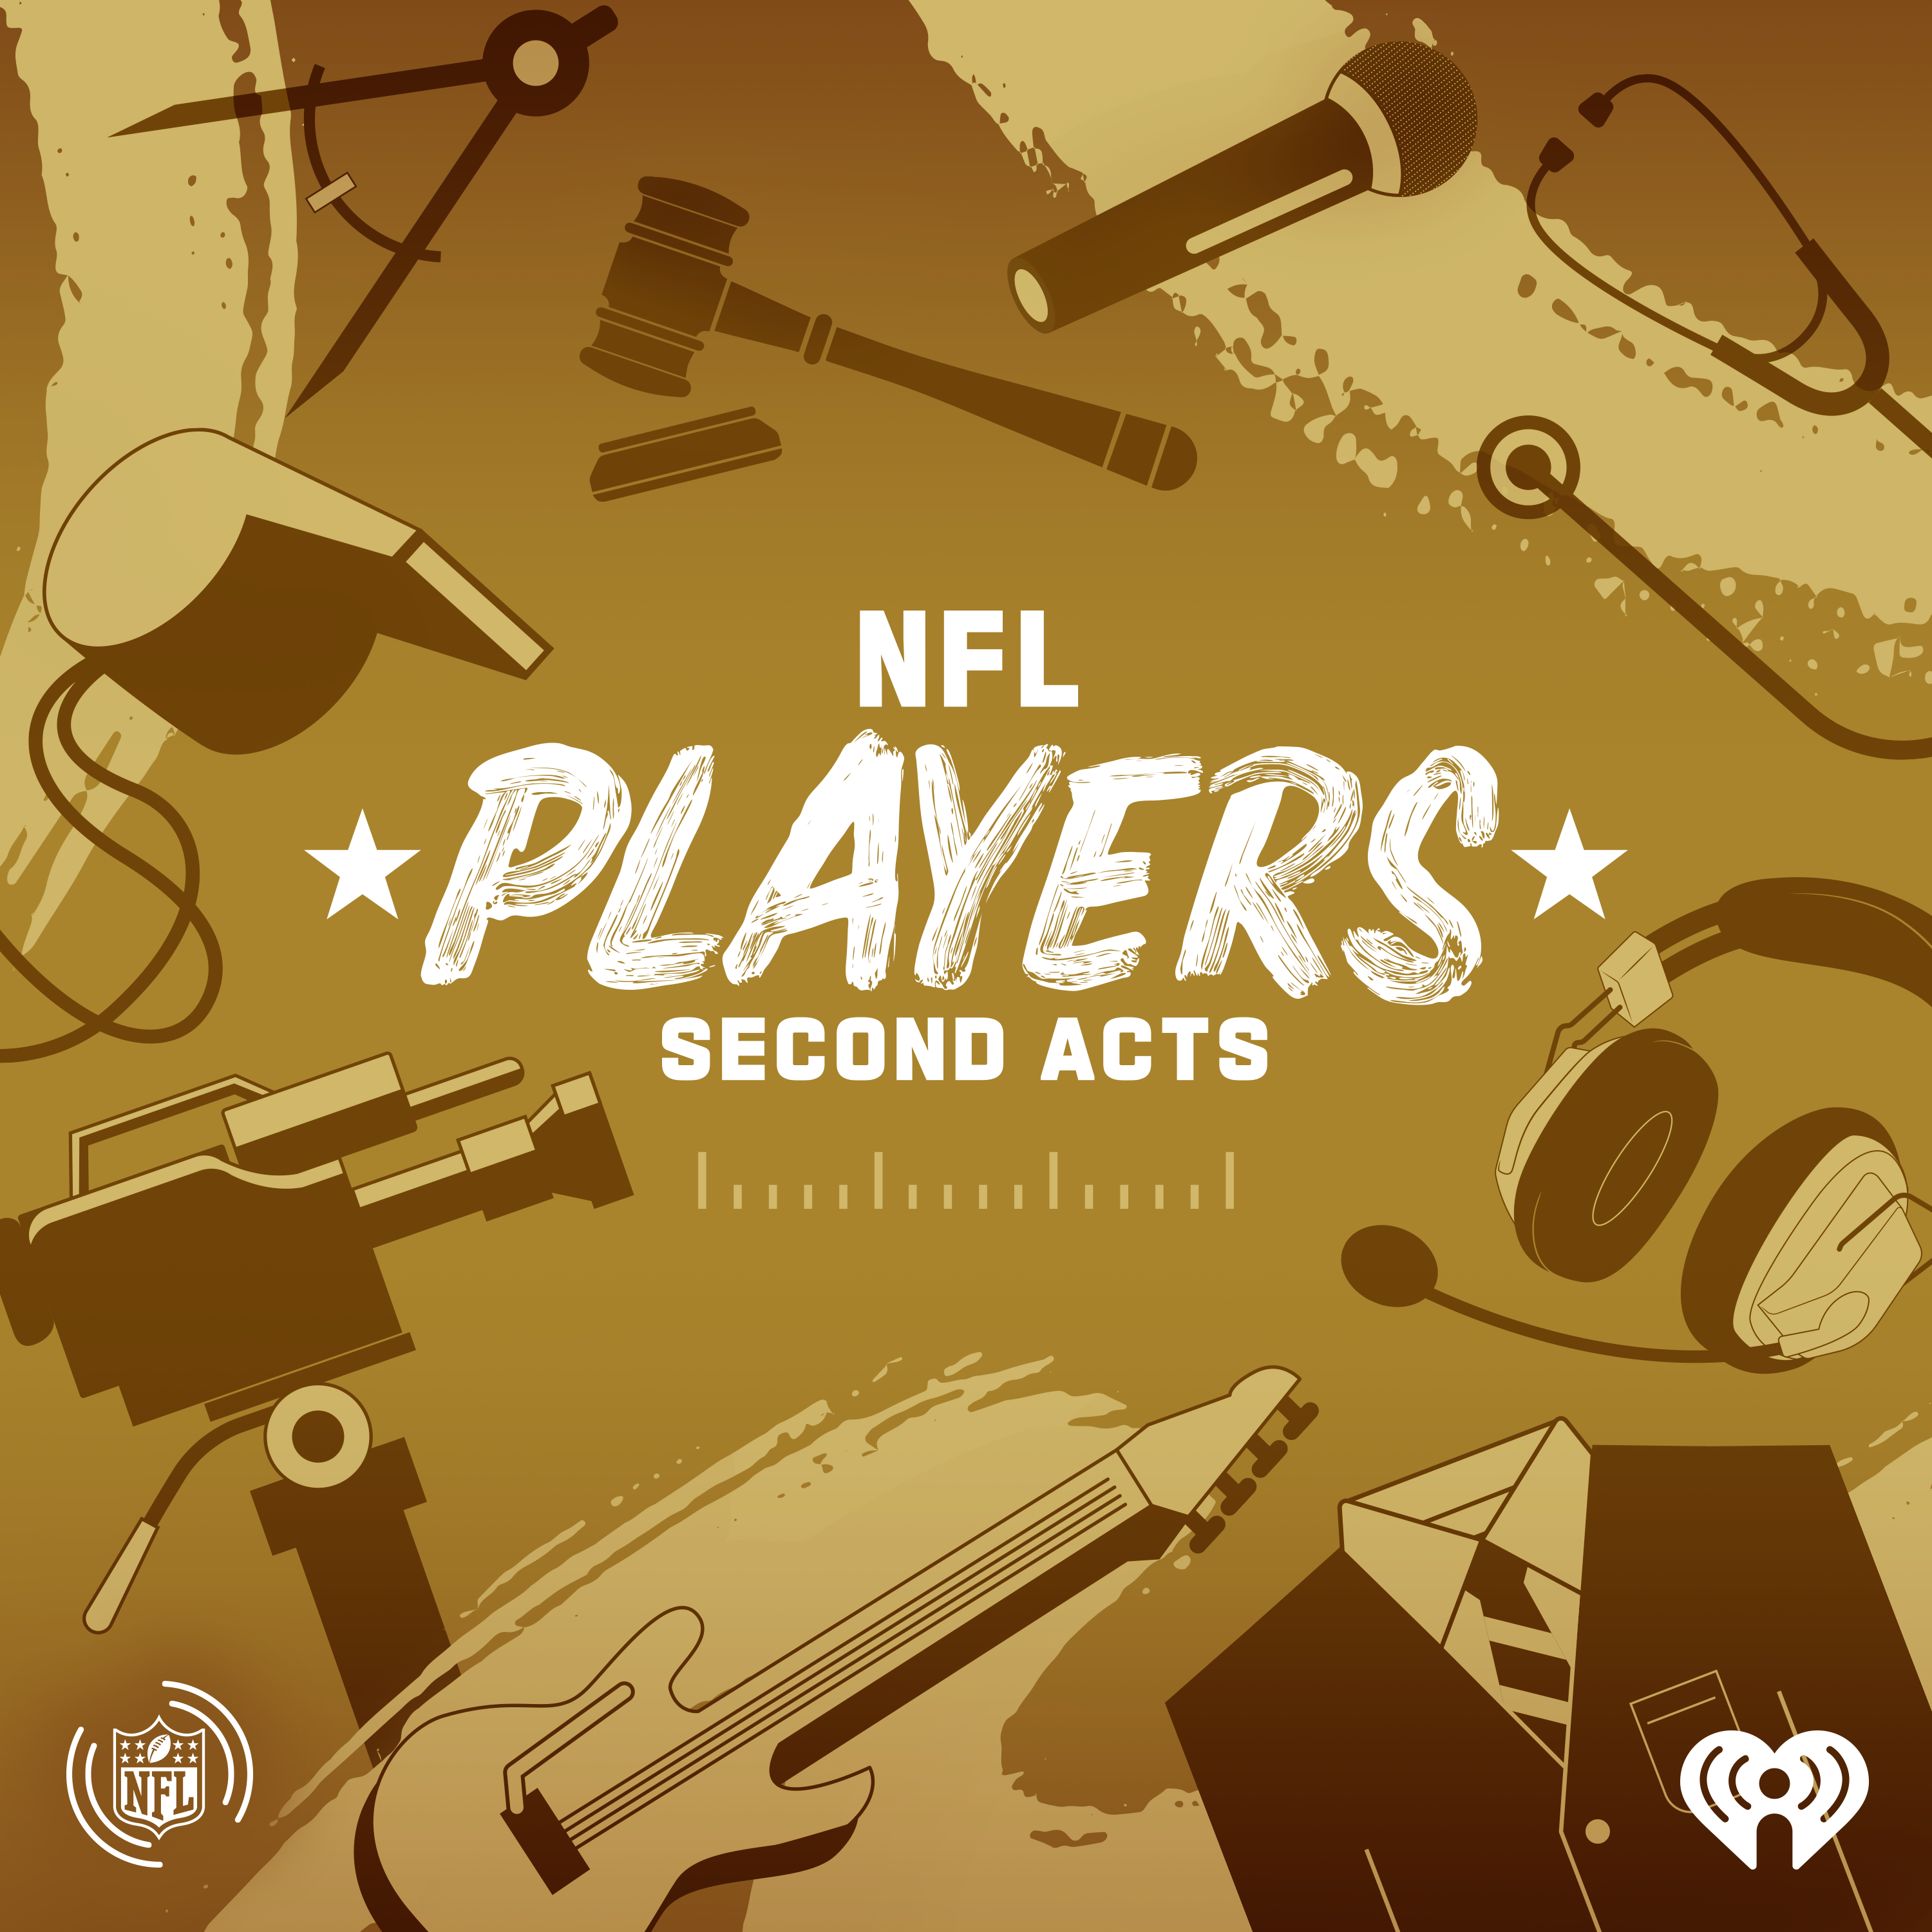 Introducing: NFL Players: Second Acts